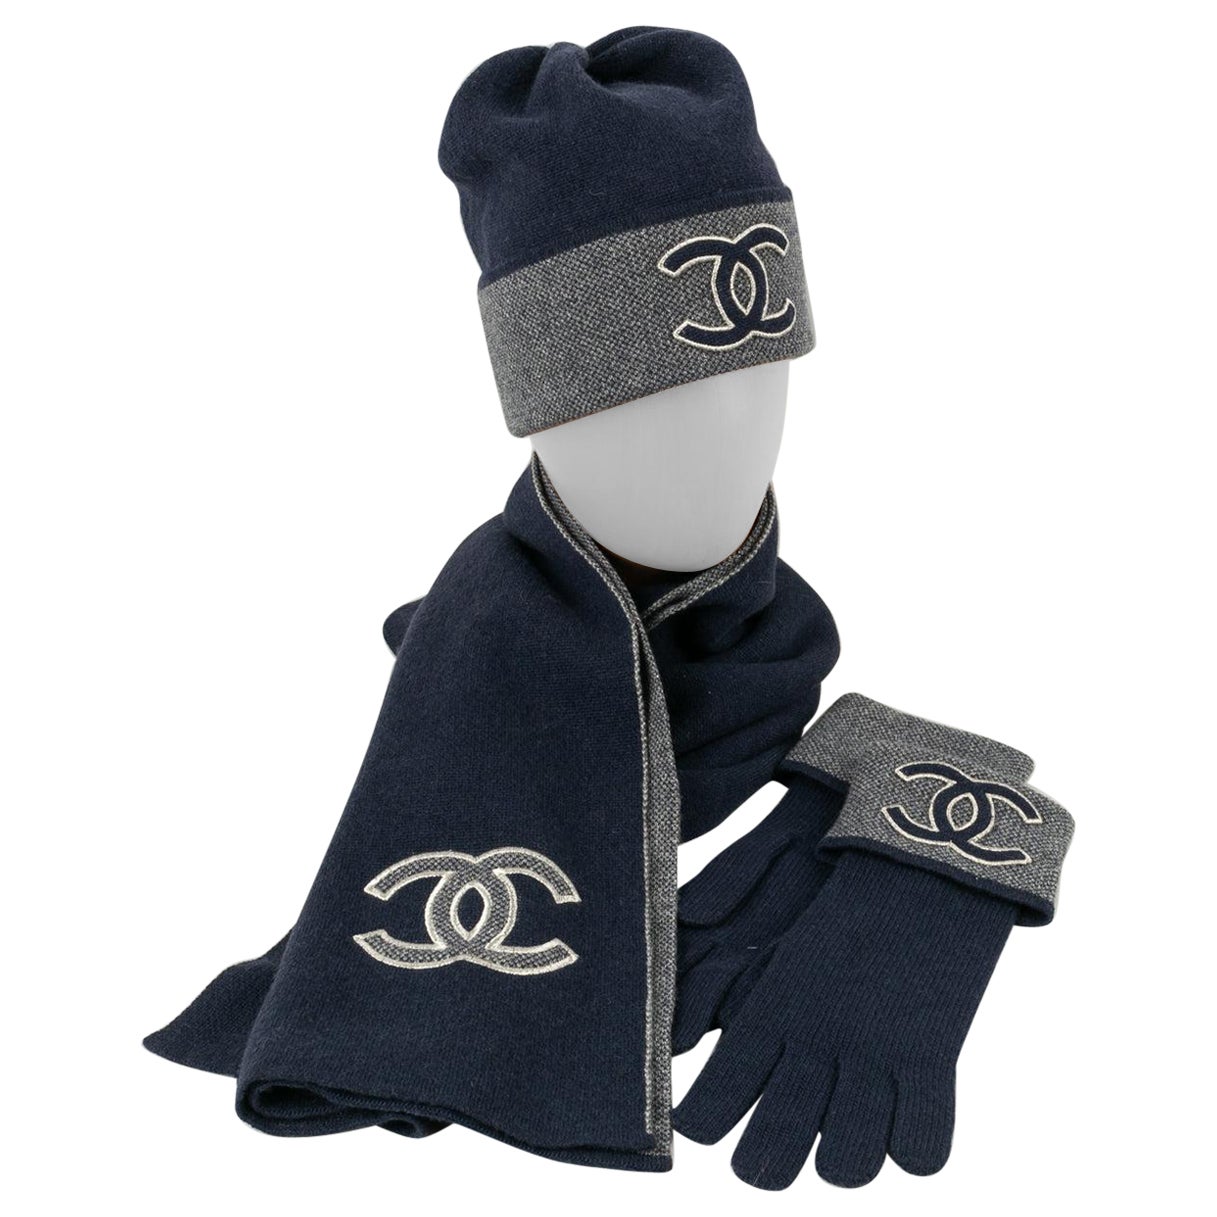 Chanel Winter Scarf, Hat, and Pair of Gloves Set For Sale at